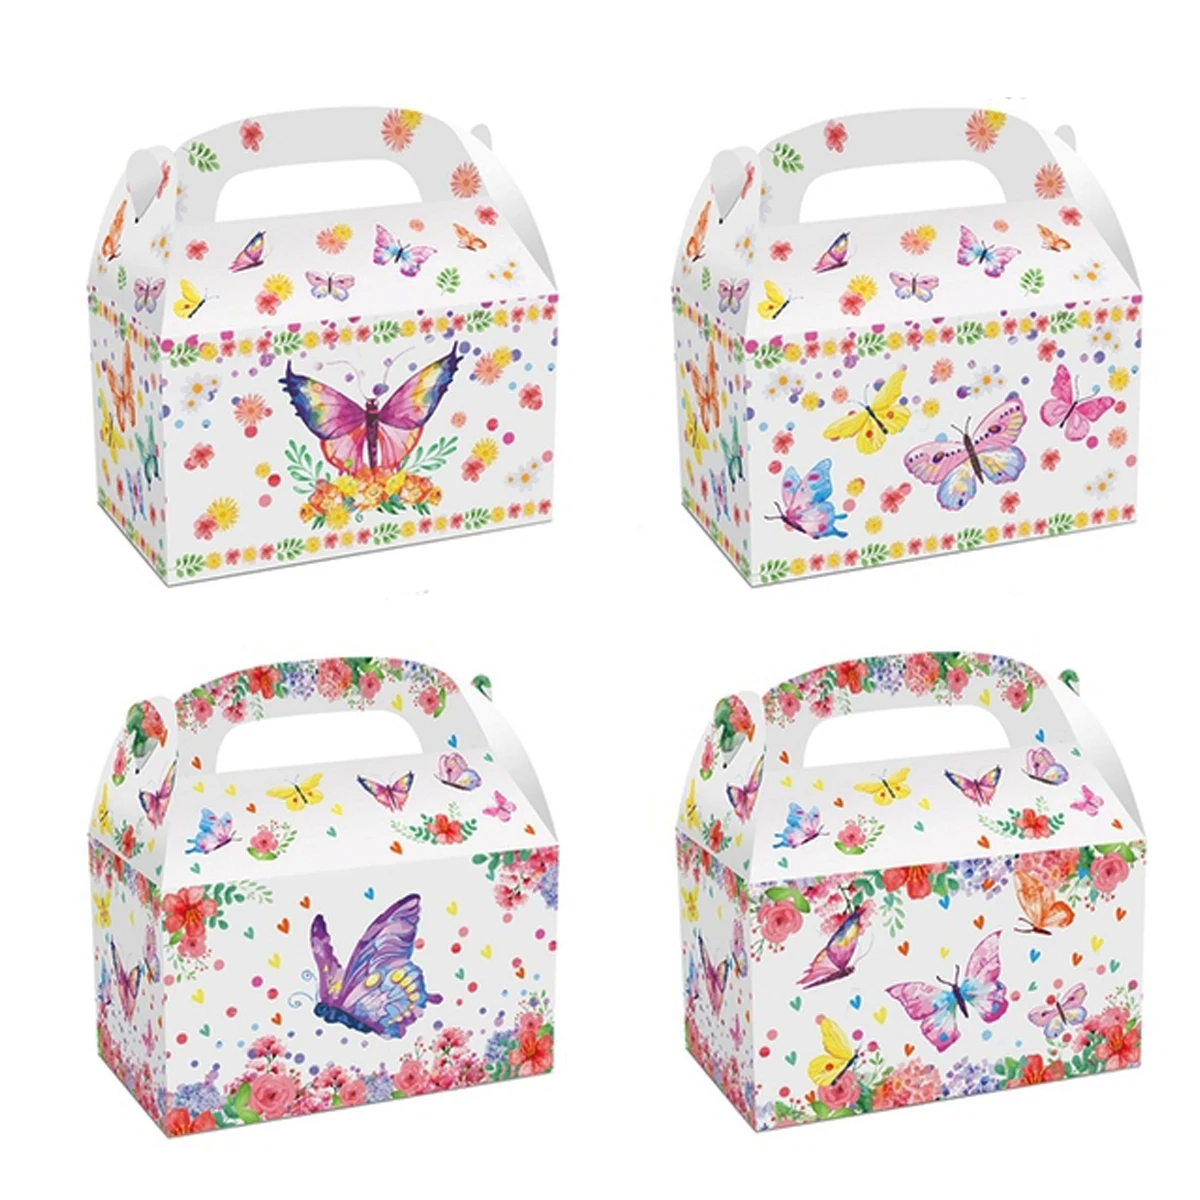 

12pcs Butterfly Gifts Box Kraft Paper Cupcake Packaging Wedding Birthday Party Baby Shower Decoration DIY Carton Candy Box Bags